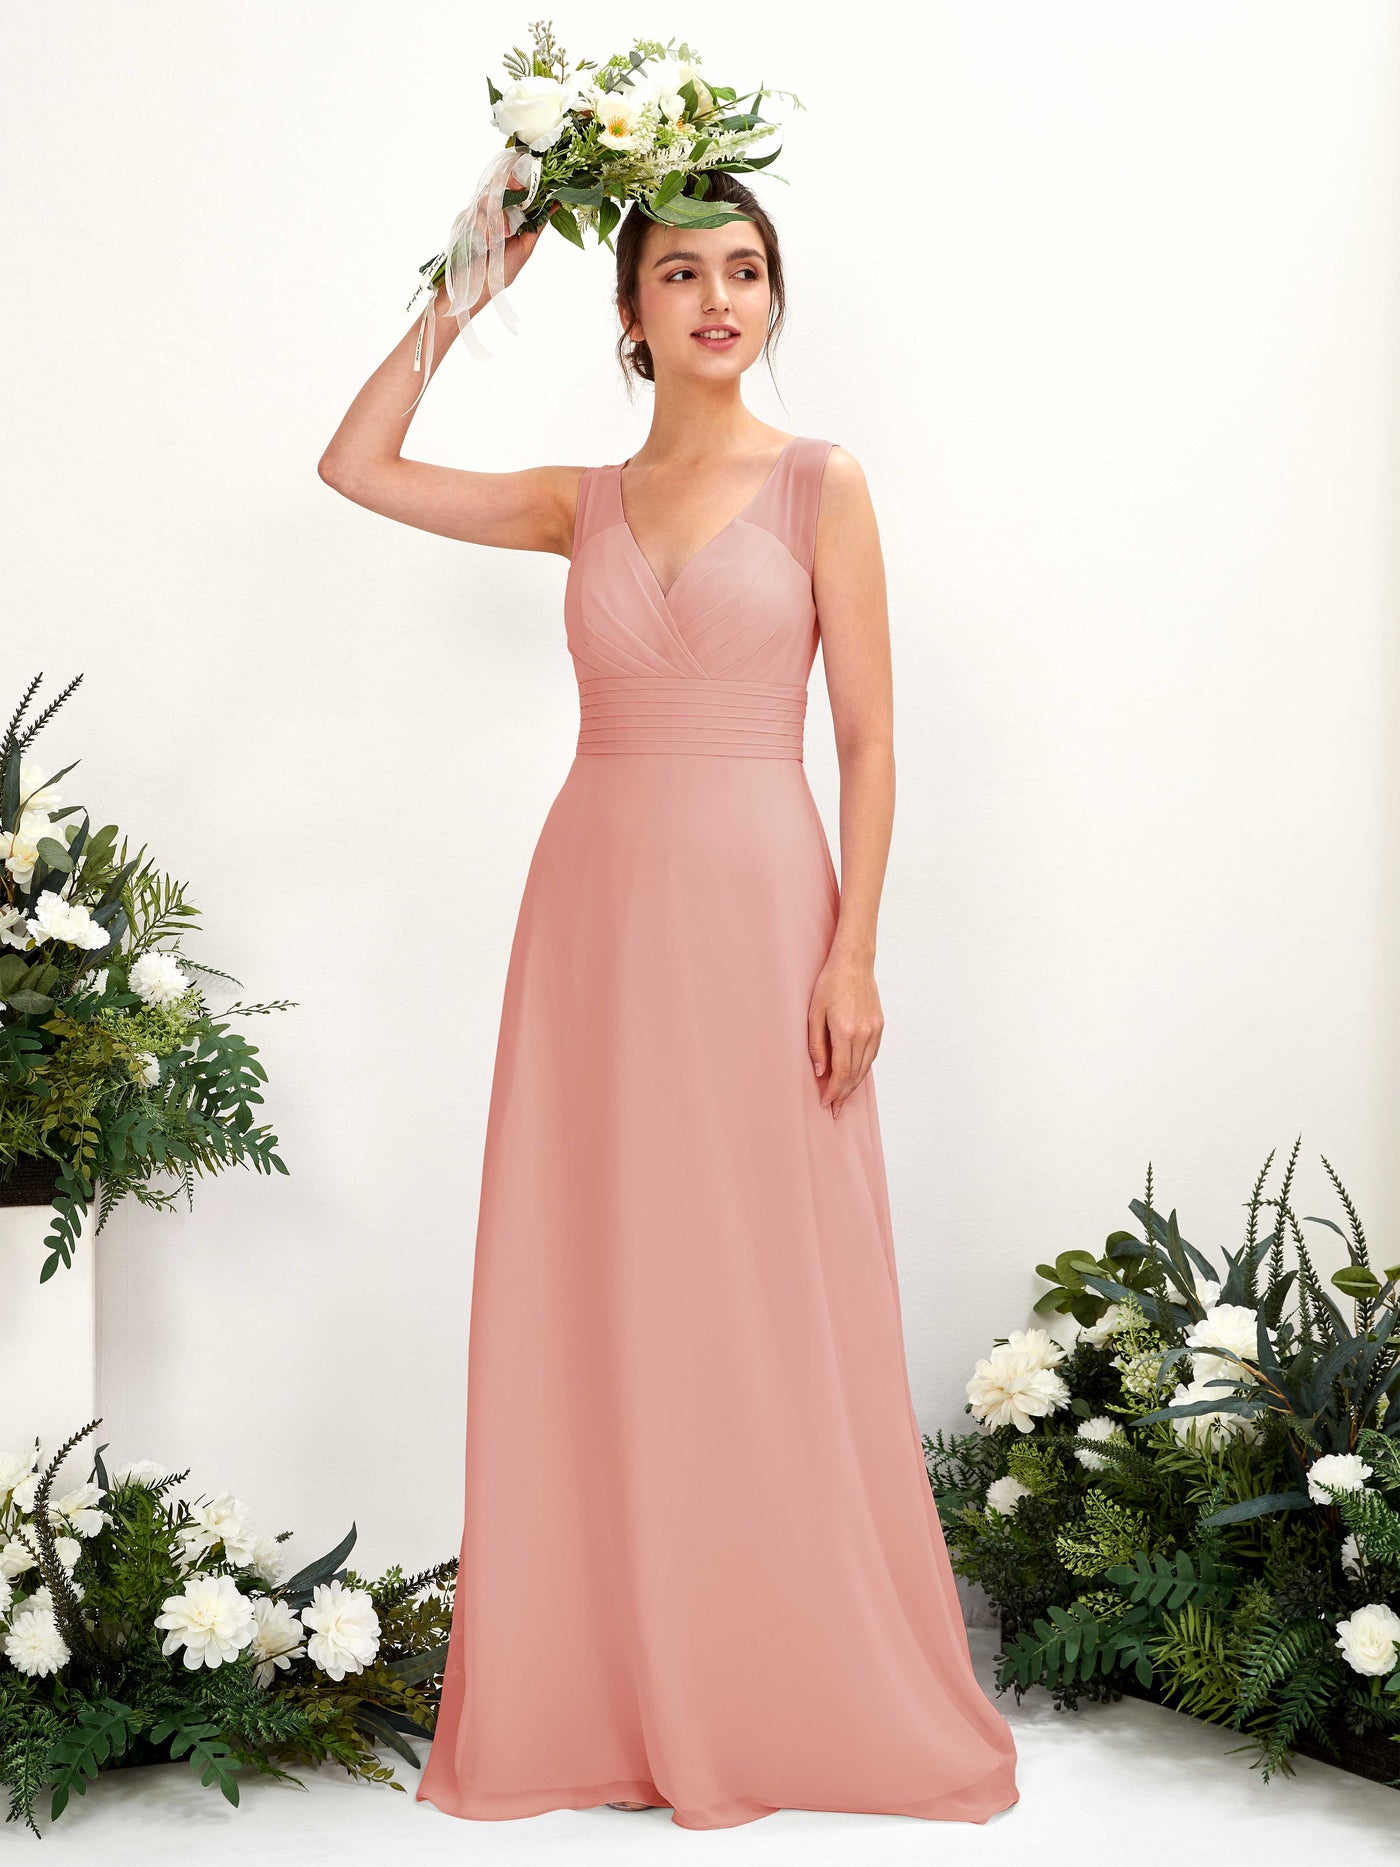 Champagne Rose Bridesmaid Dresses Bridesmaid Dress A-line Chiffon Straps Full Length Sleeveless Wedding Party Dress (81220906)#color_champagne-rose